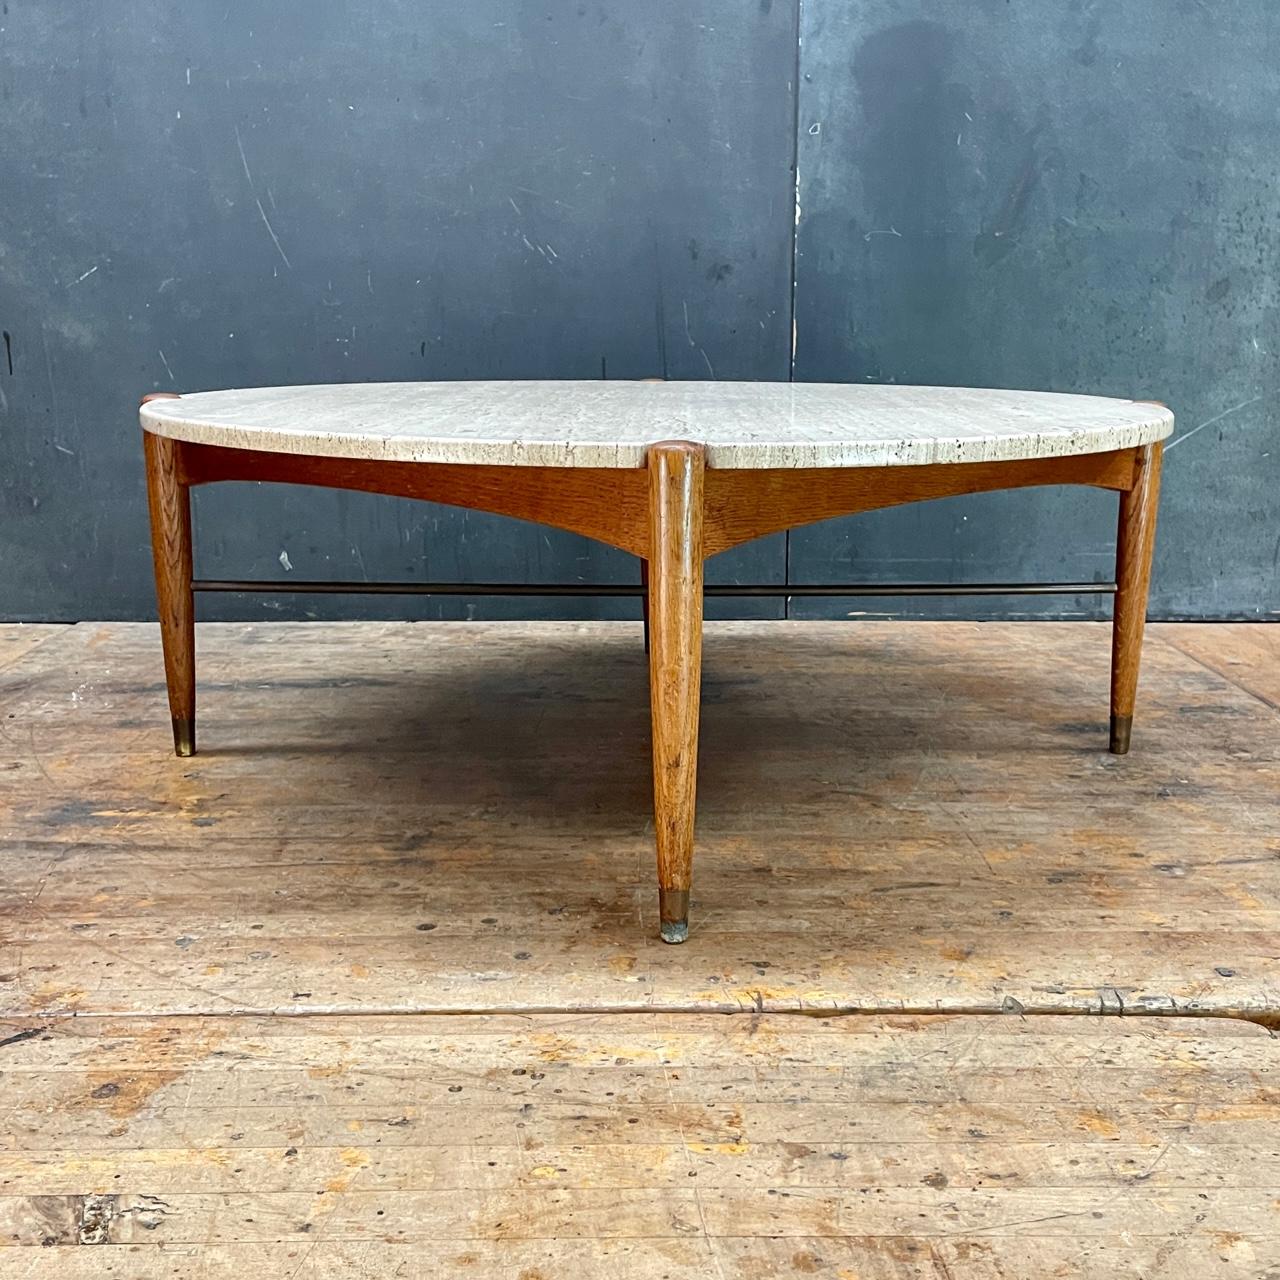 Sweden, c.1960. Travertine marble, oak, brass round low coffee table. Burnished marked, Made in Sweden, DUX. 

All original and from the original owners estate, all patina has been preserved for the next owner. No damage to stone top, base is strong